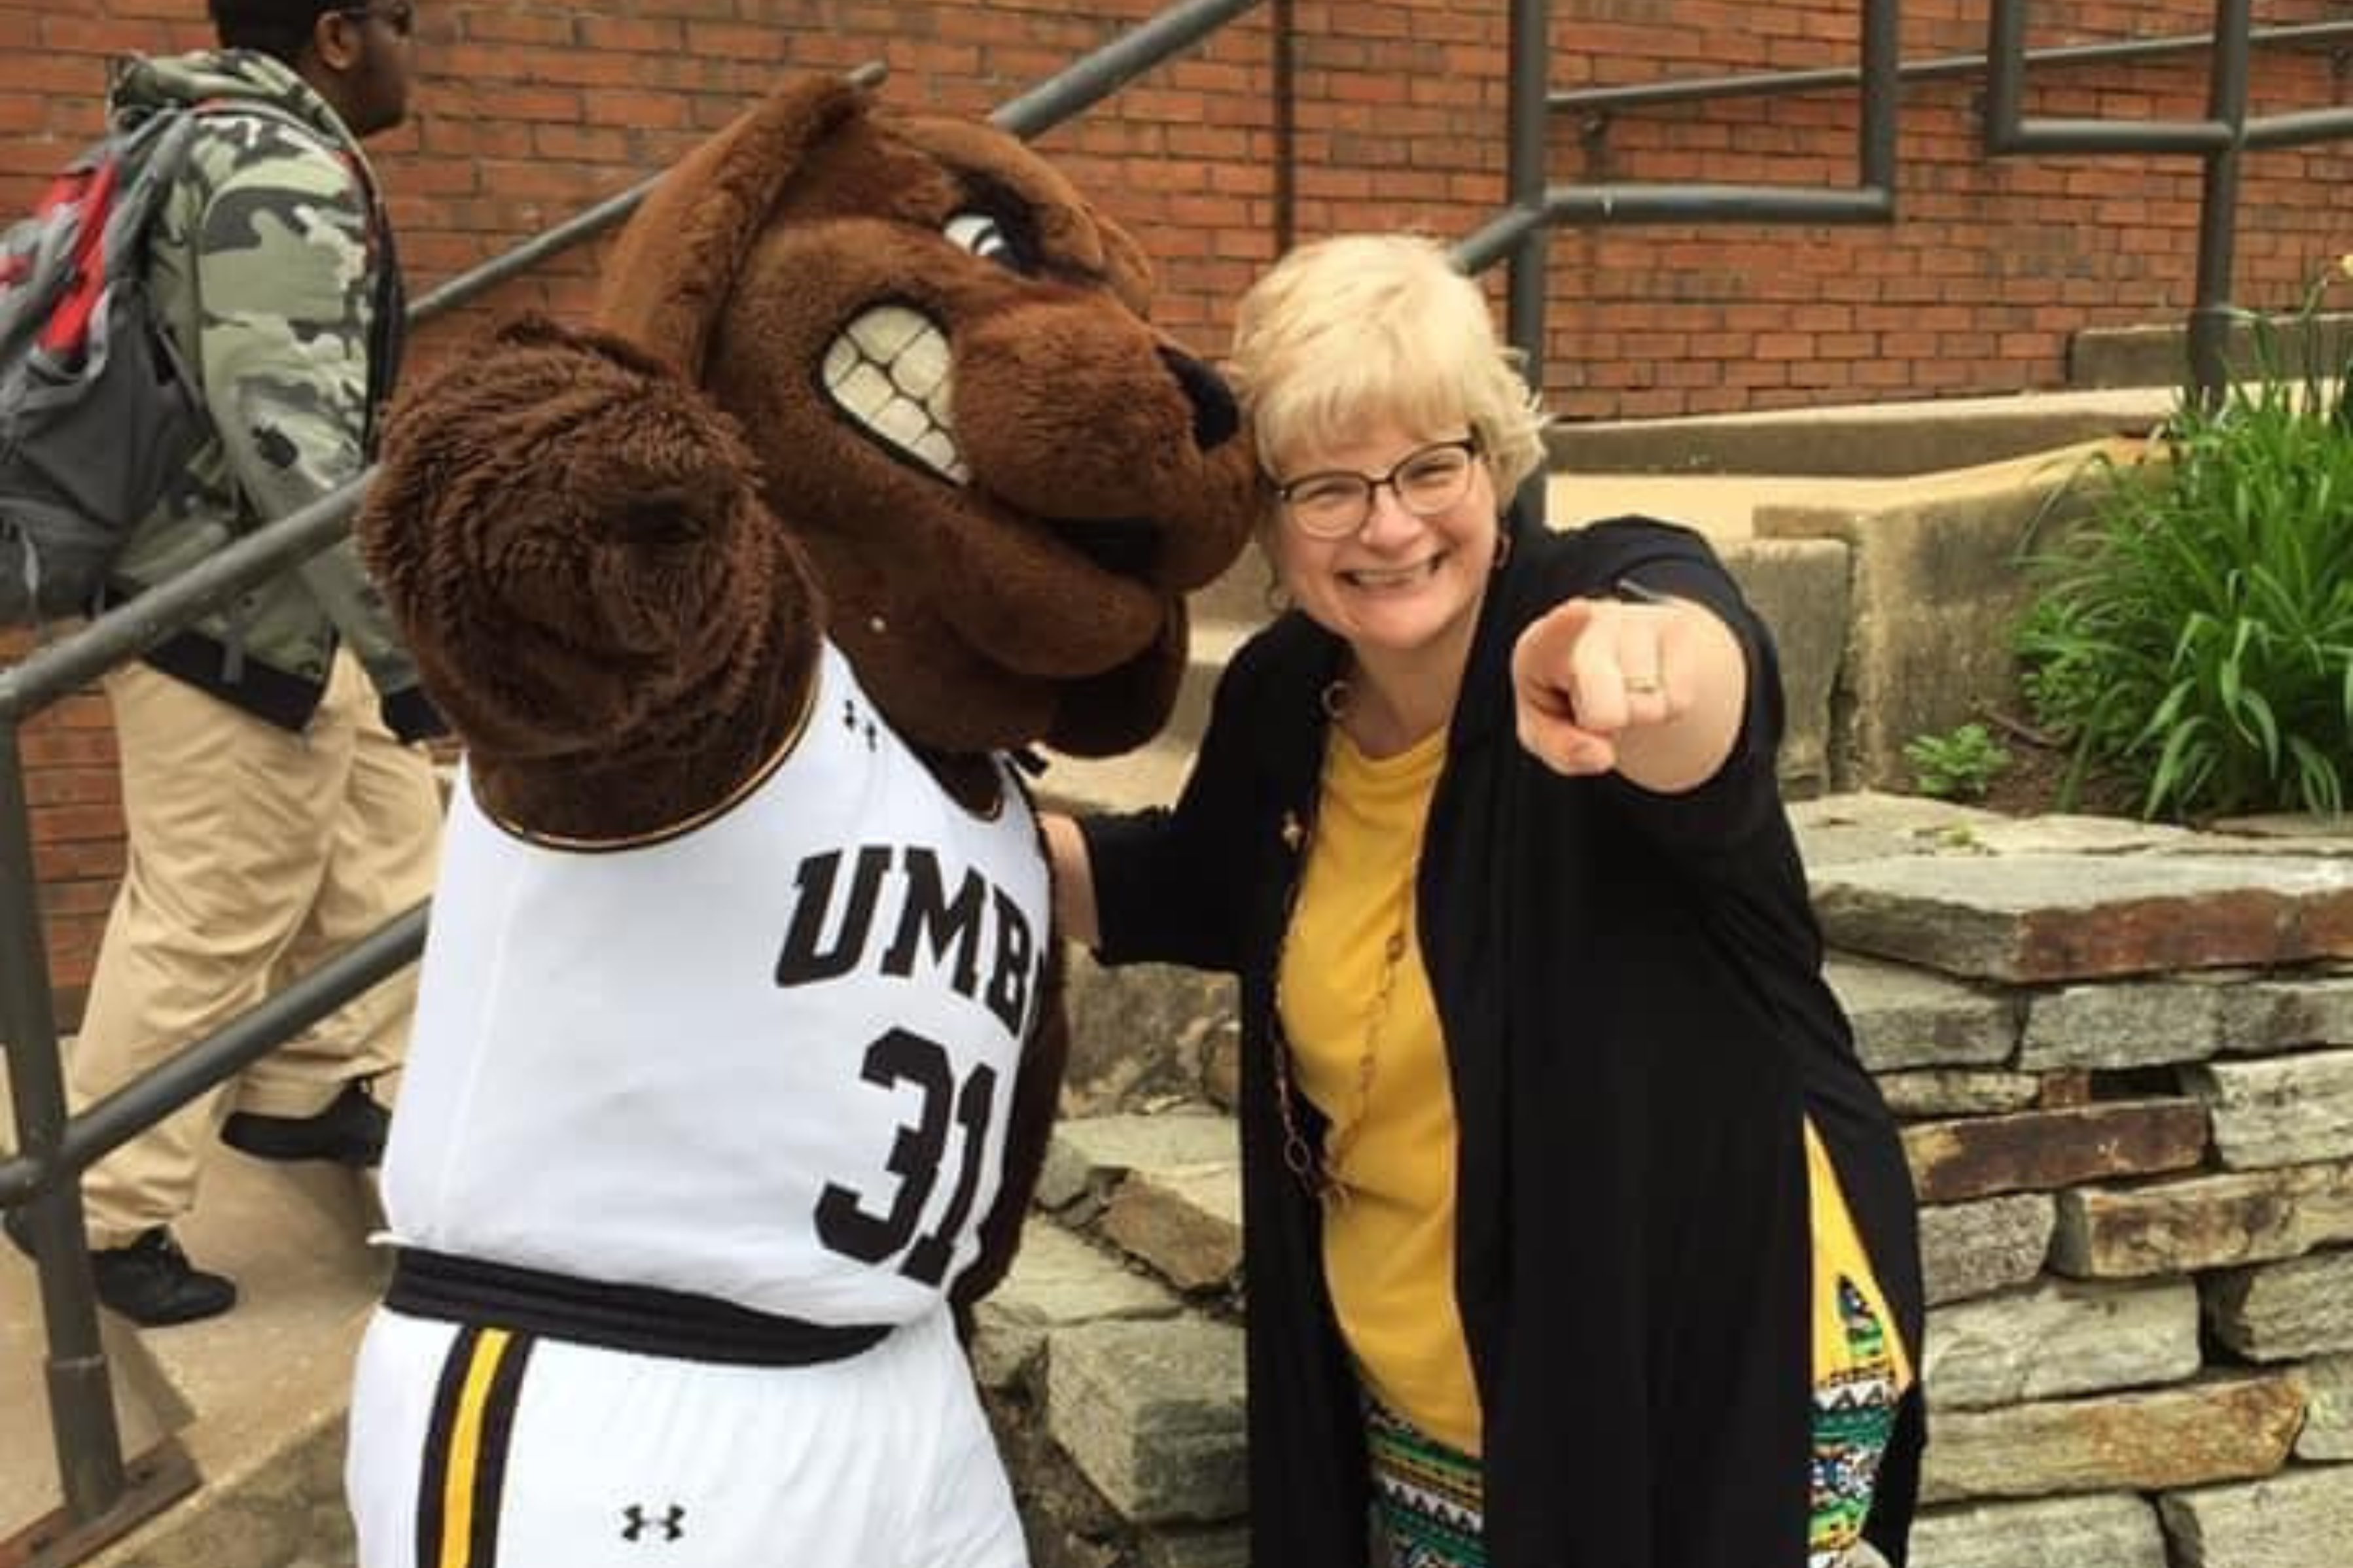 Connie Pierson and the UMBC mascot, True Grit, standing arm in arm and pointing at the camera.